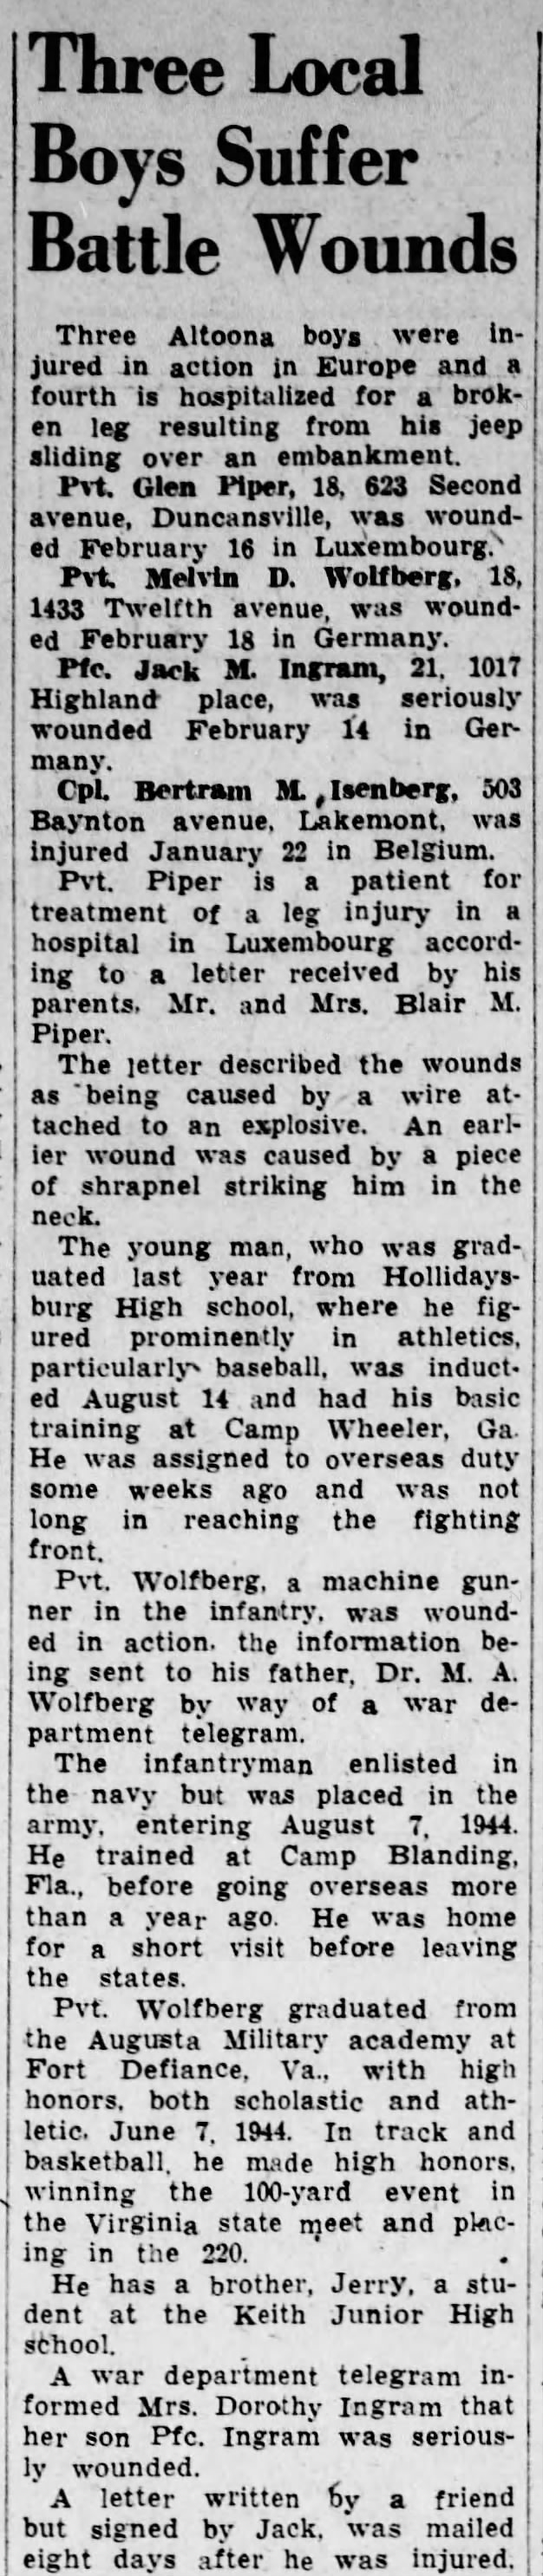 Pvt. Melvin wounded in action-6 March 1945